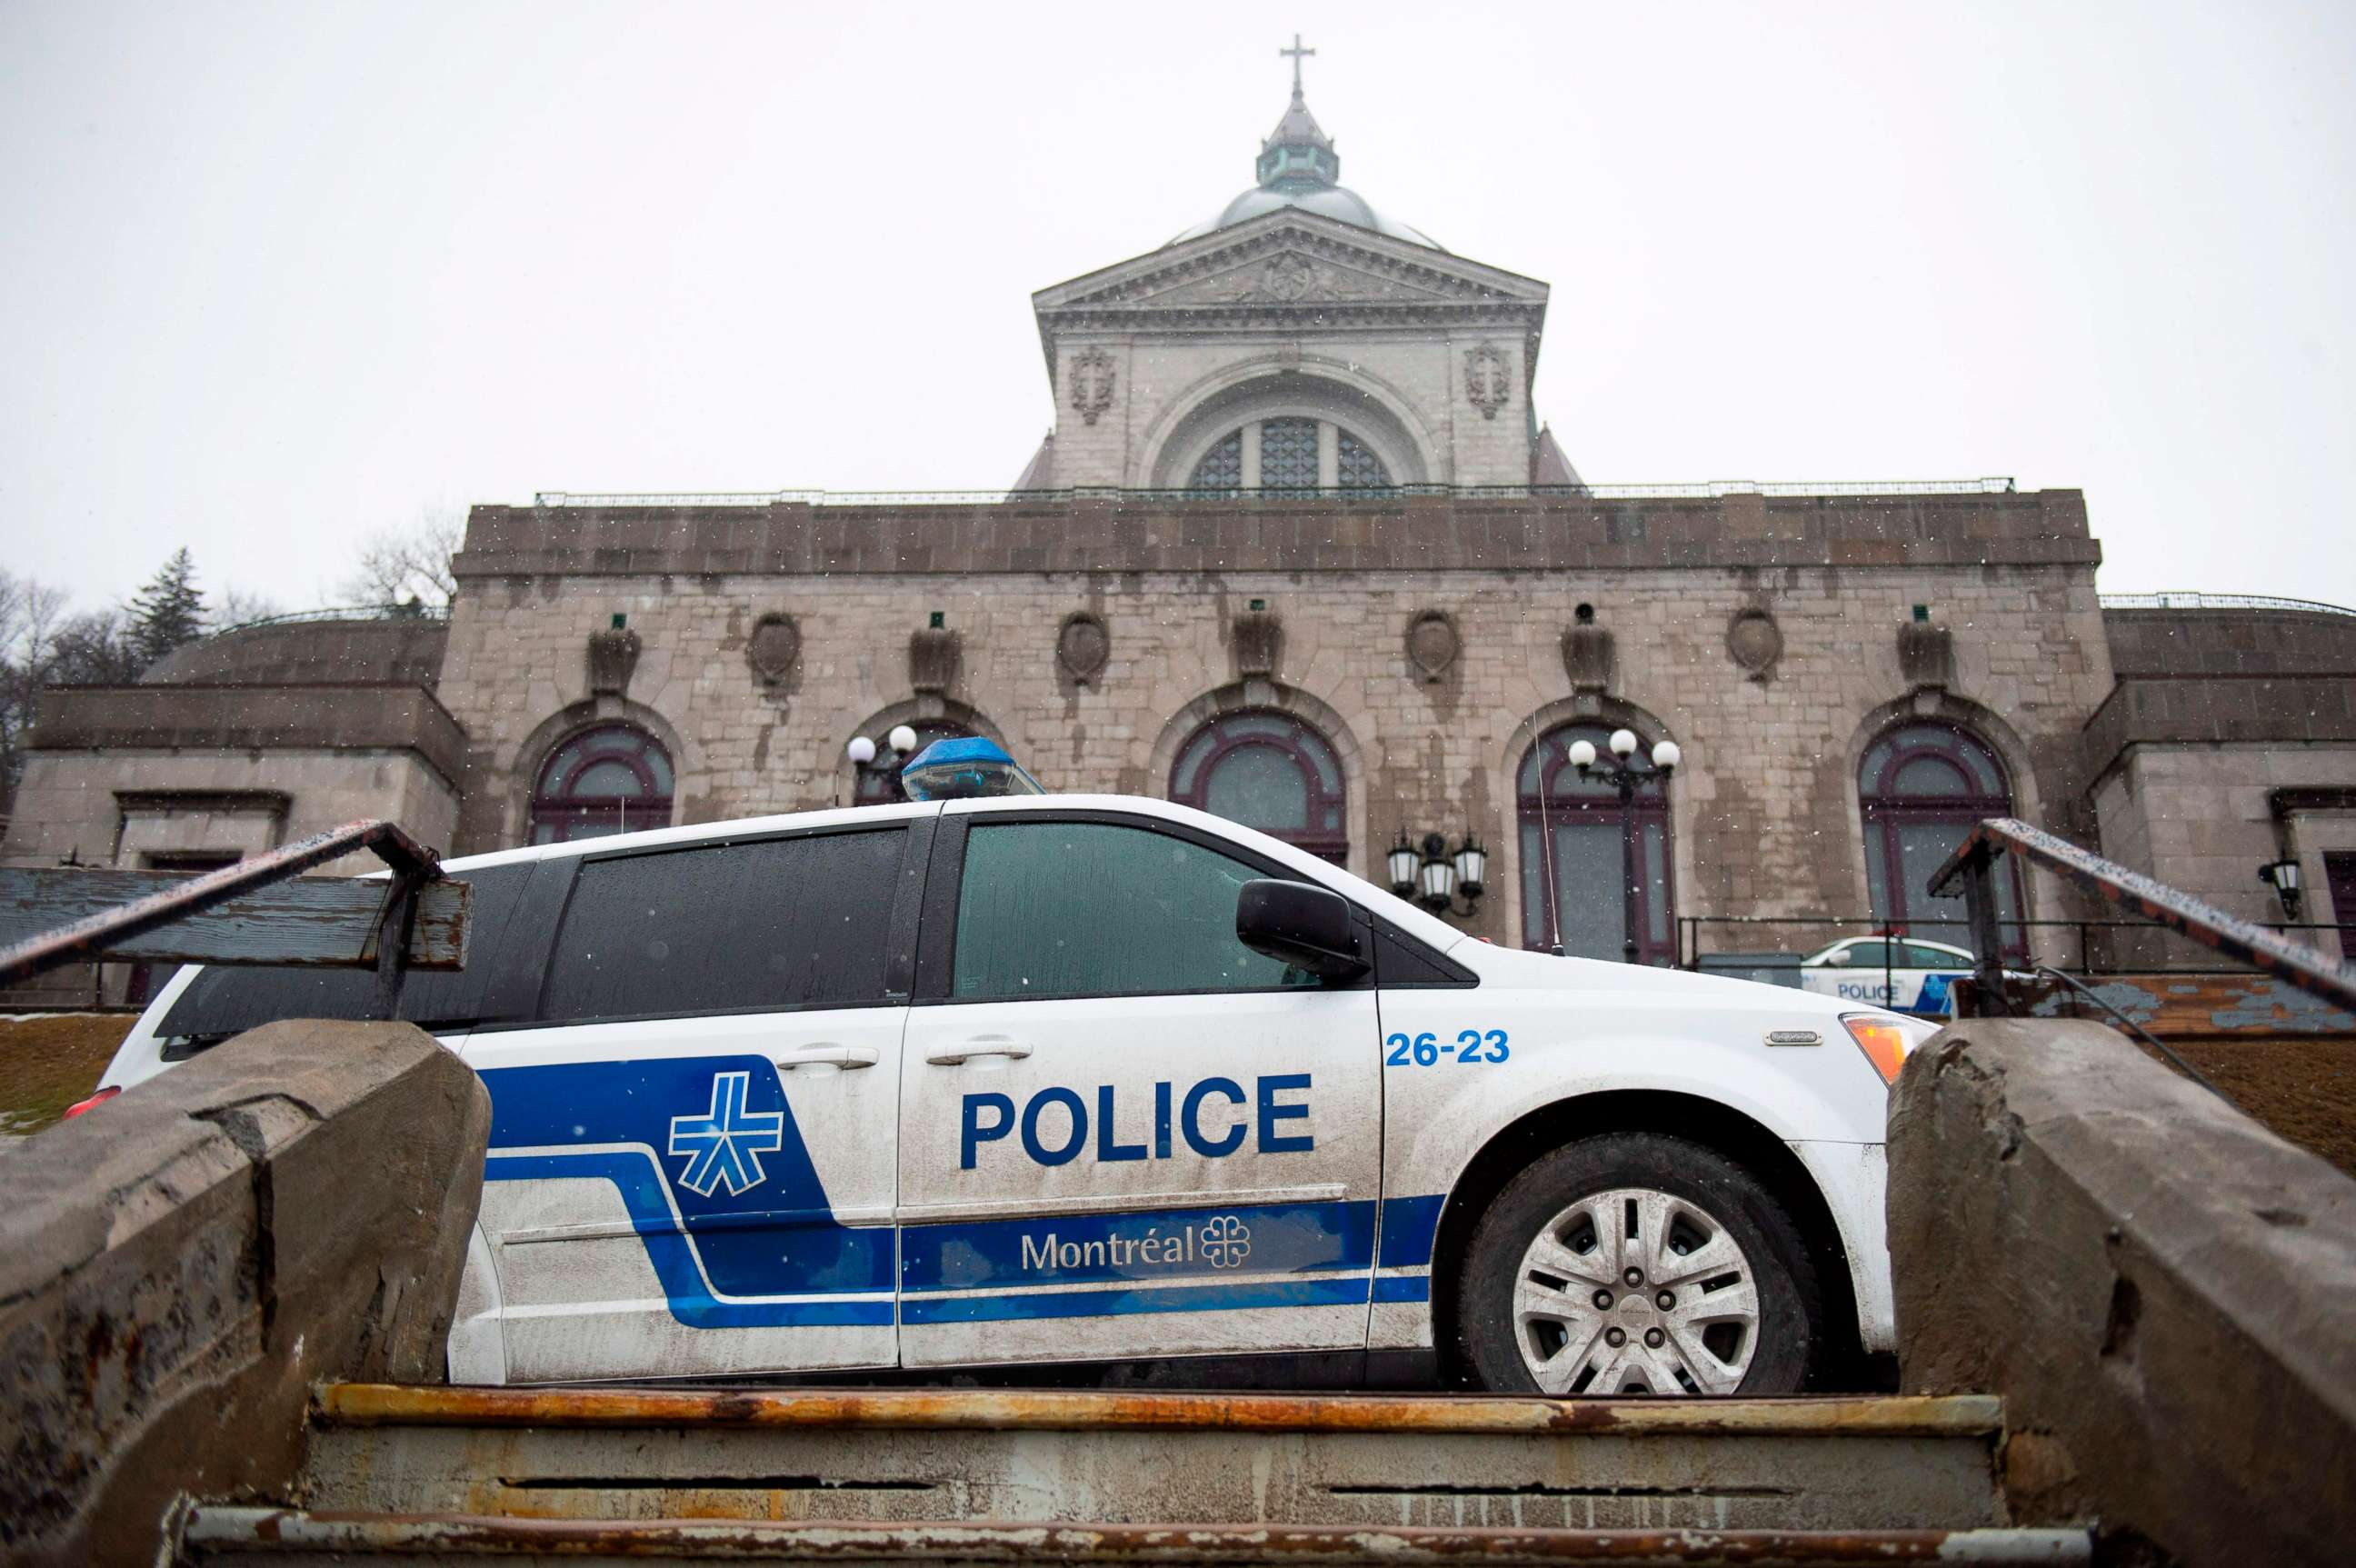 PHOTO: Police provide security at Saint Joseph's Oratory in Montreal, March 22, 2019, after Catholic Priest Claude Grou was stabbed during a livestreamed morning mass.